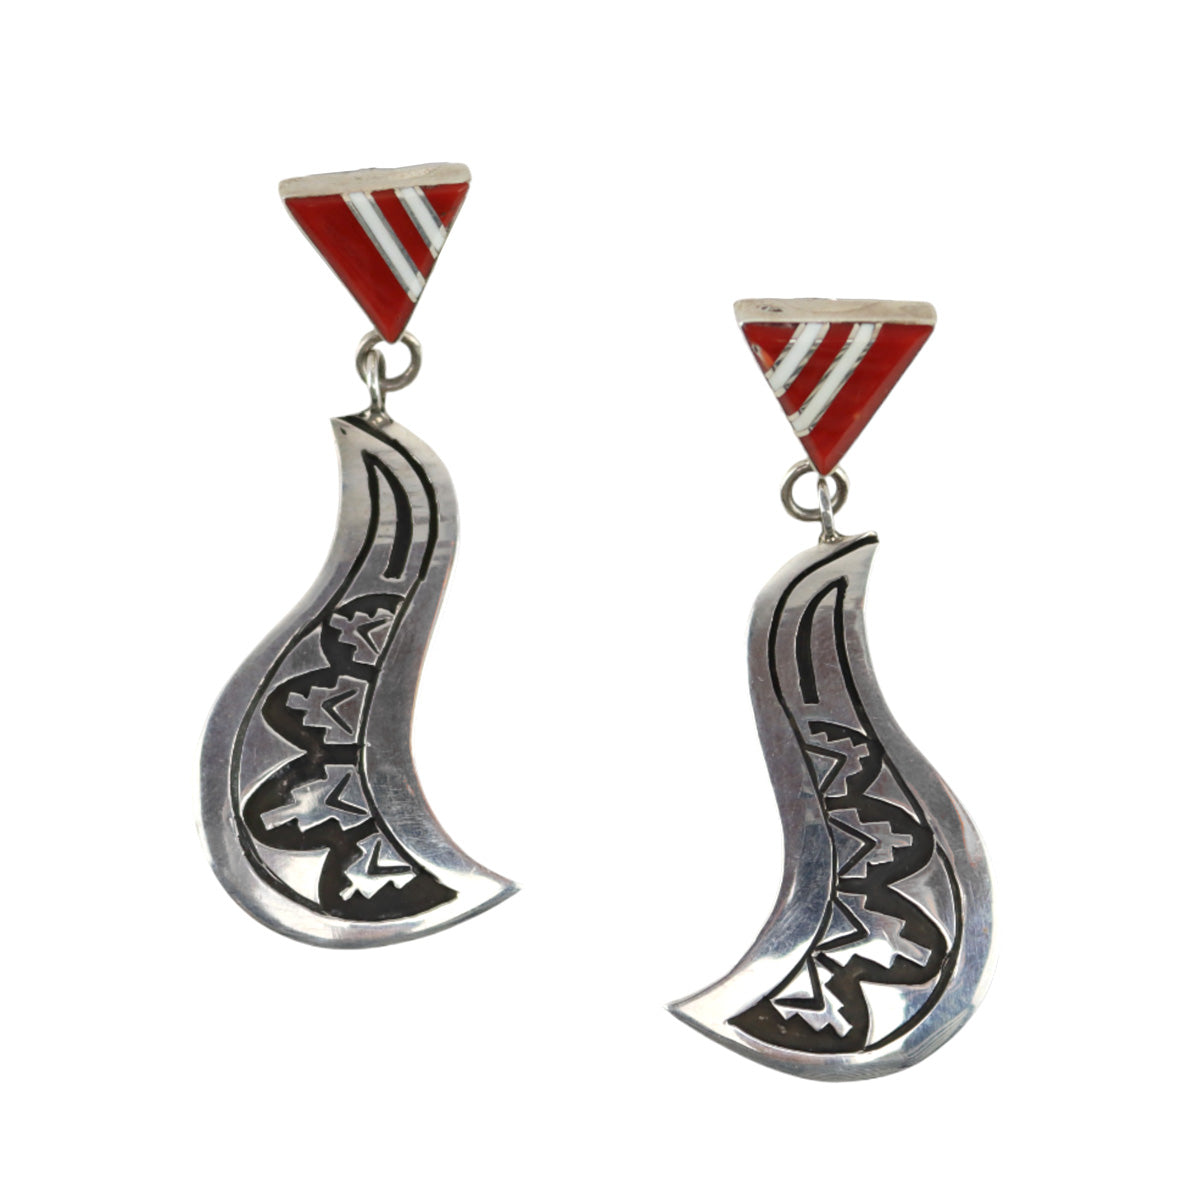 Abraham Begay - Navajo - Contemporary Coral and Shell Inlay and Sterling Silver Overlay Post Earrings, 2.25" x 1" (J16078)